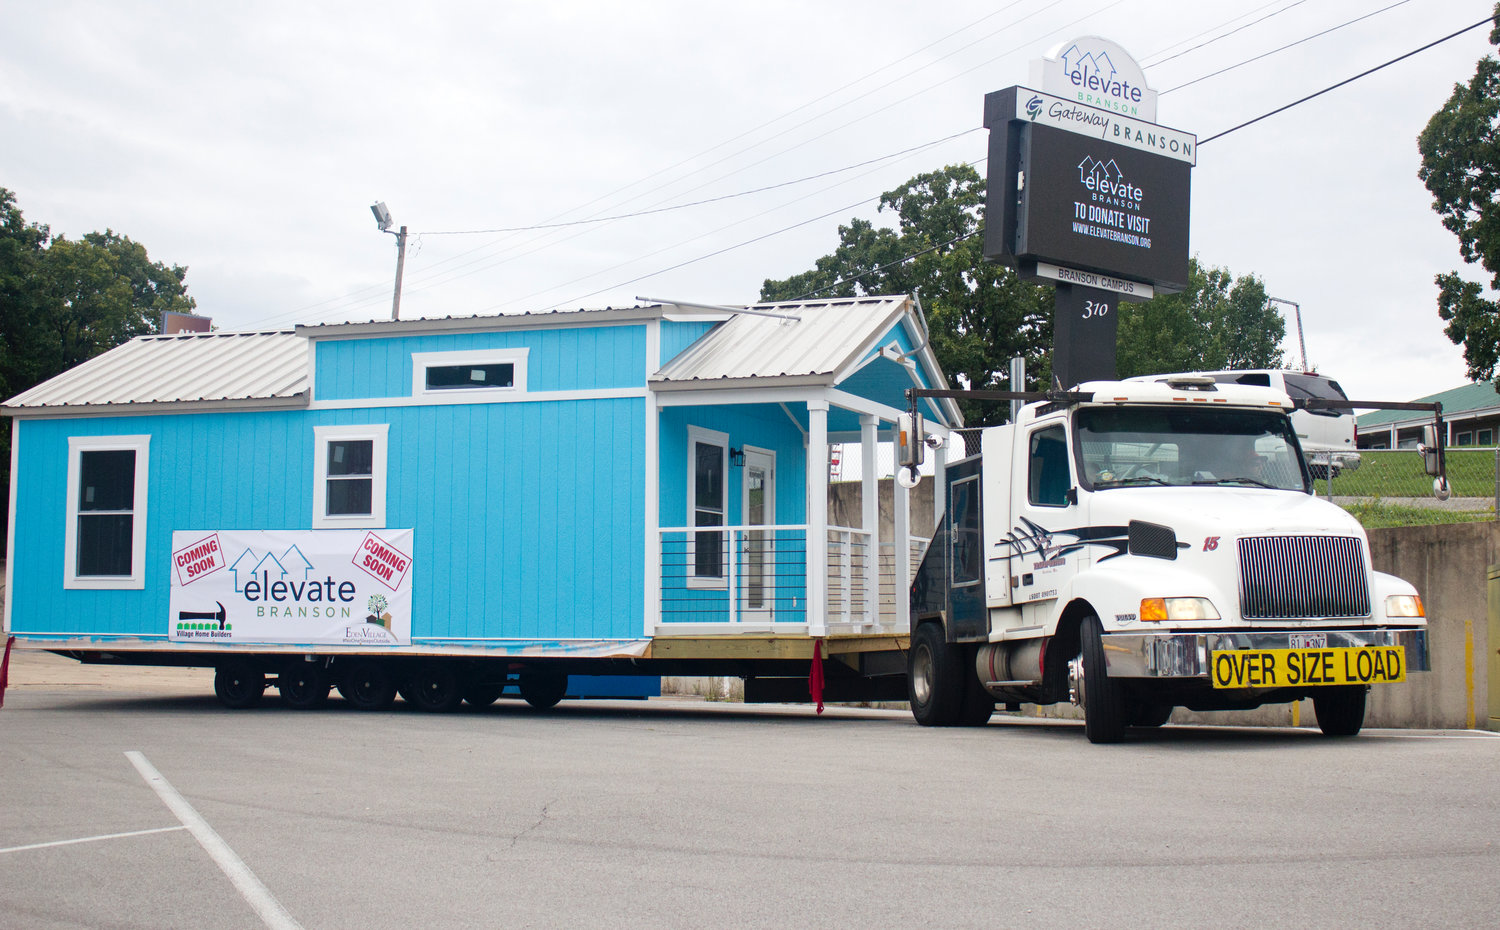 A model 400-square-foot house is temporarily located in the parking lot of Elevate Branson’s campus at 310 Gretna Road to promote Elevate Community.